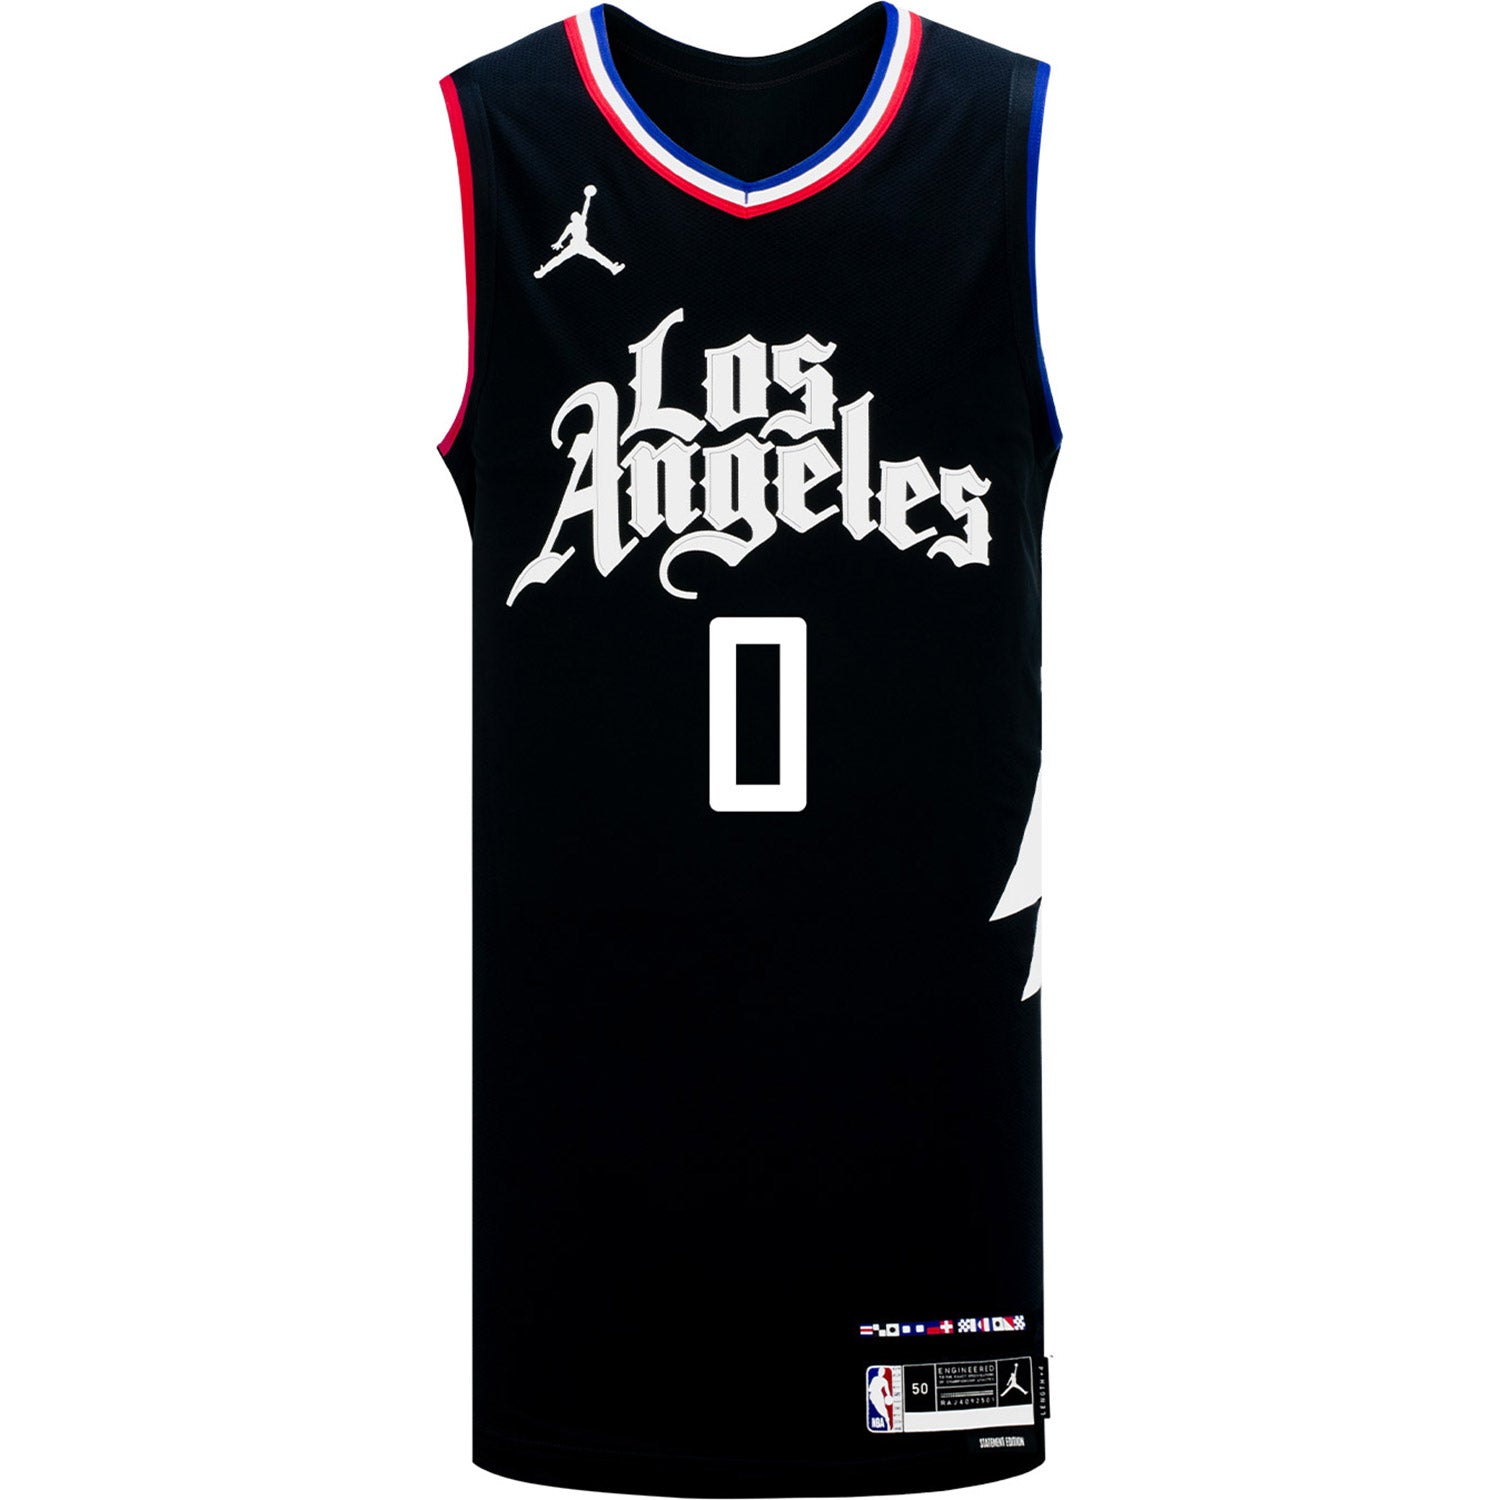 LA Clippers 22-23 Statement Jersey Revealed